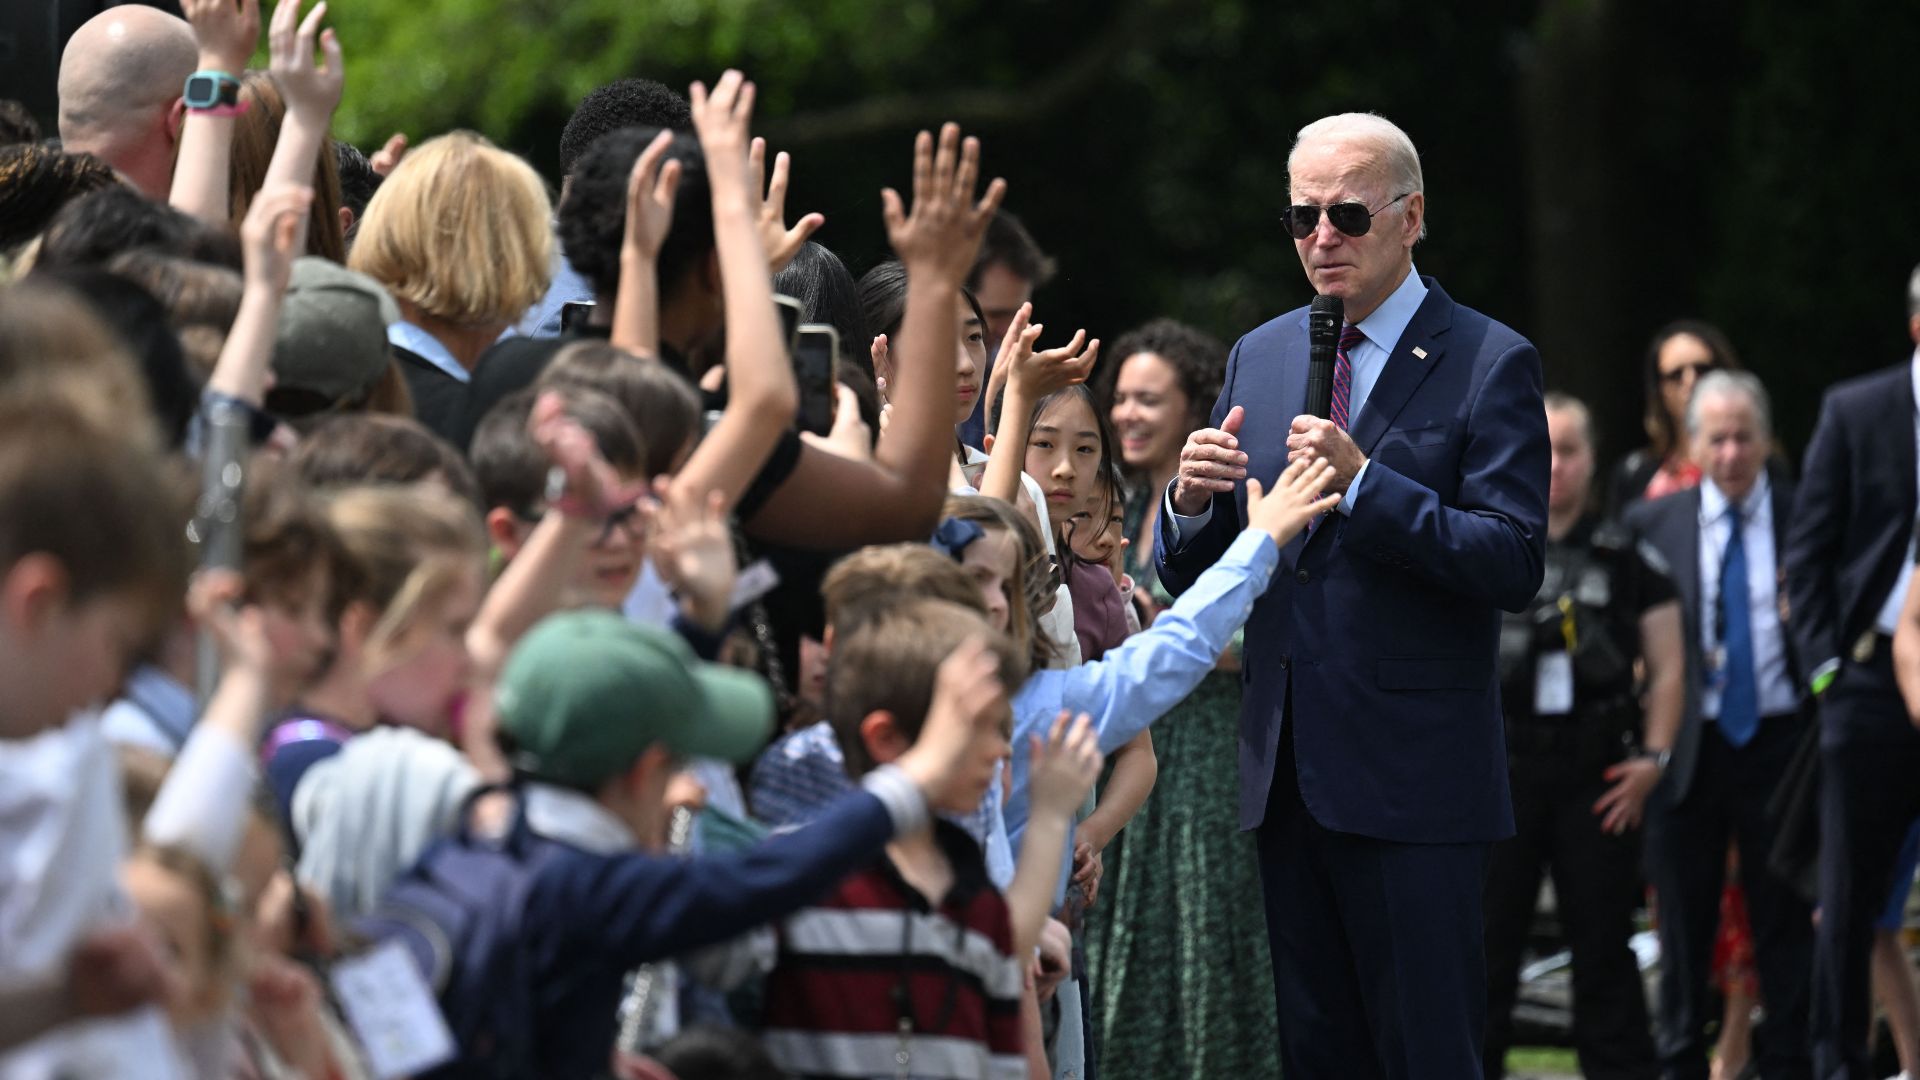 WATCH: Biden Stumped By Kid’s Question, Forgets Last Country He Visited